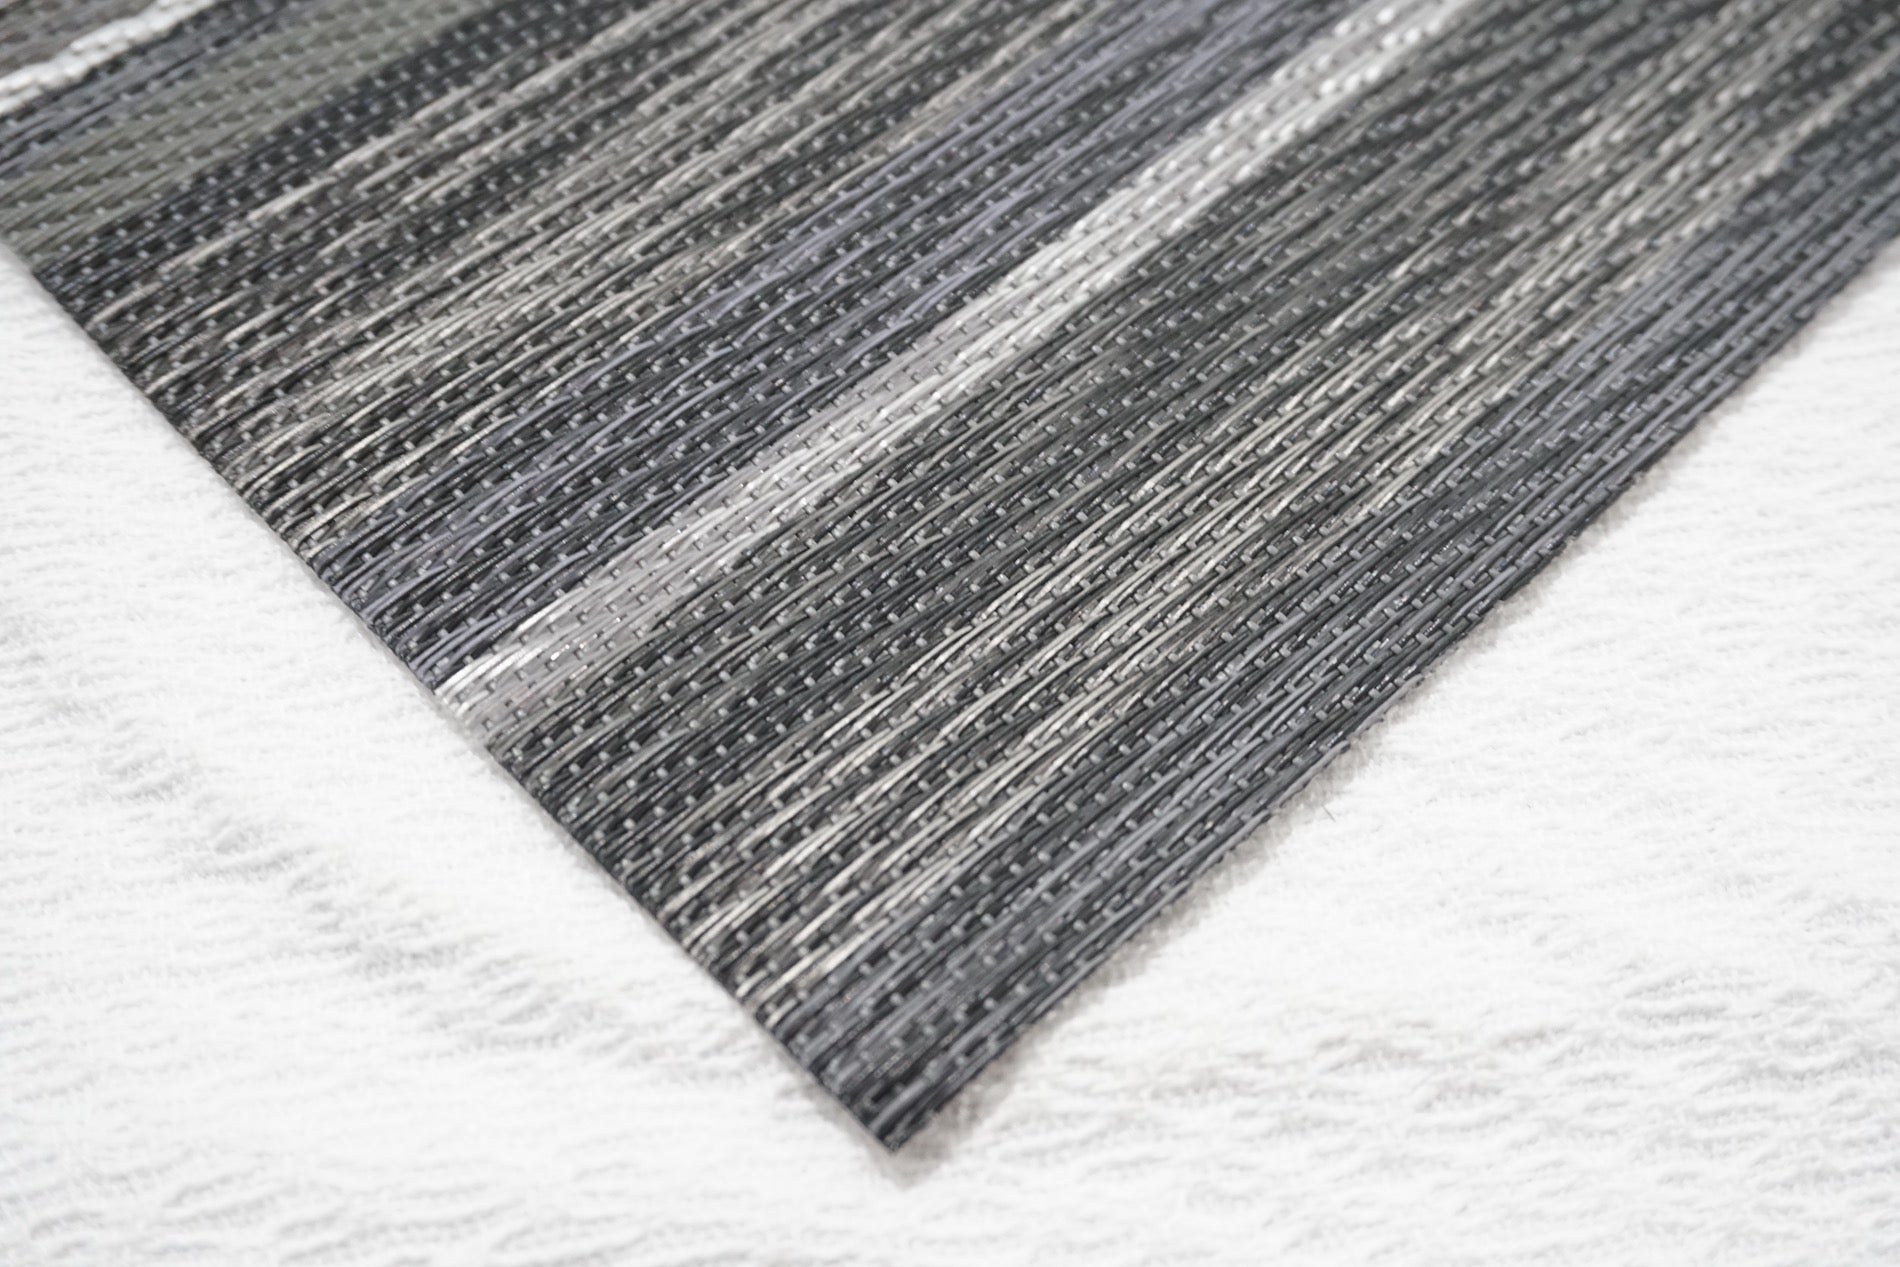 Dainty Home Multistripes Woven Textilene Crossweave With Textured Geometric Stripe Pattern Reversible 13" x 19" Rectangular Placemats